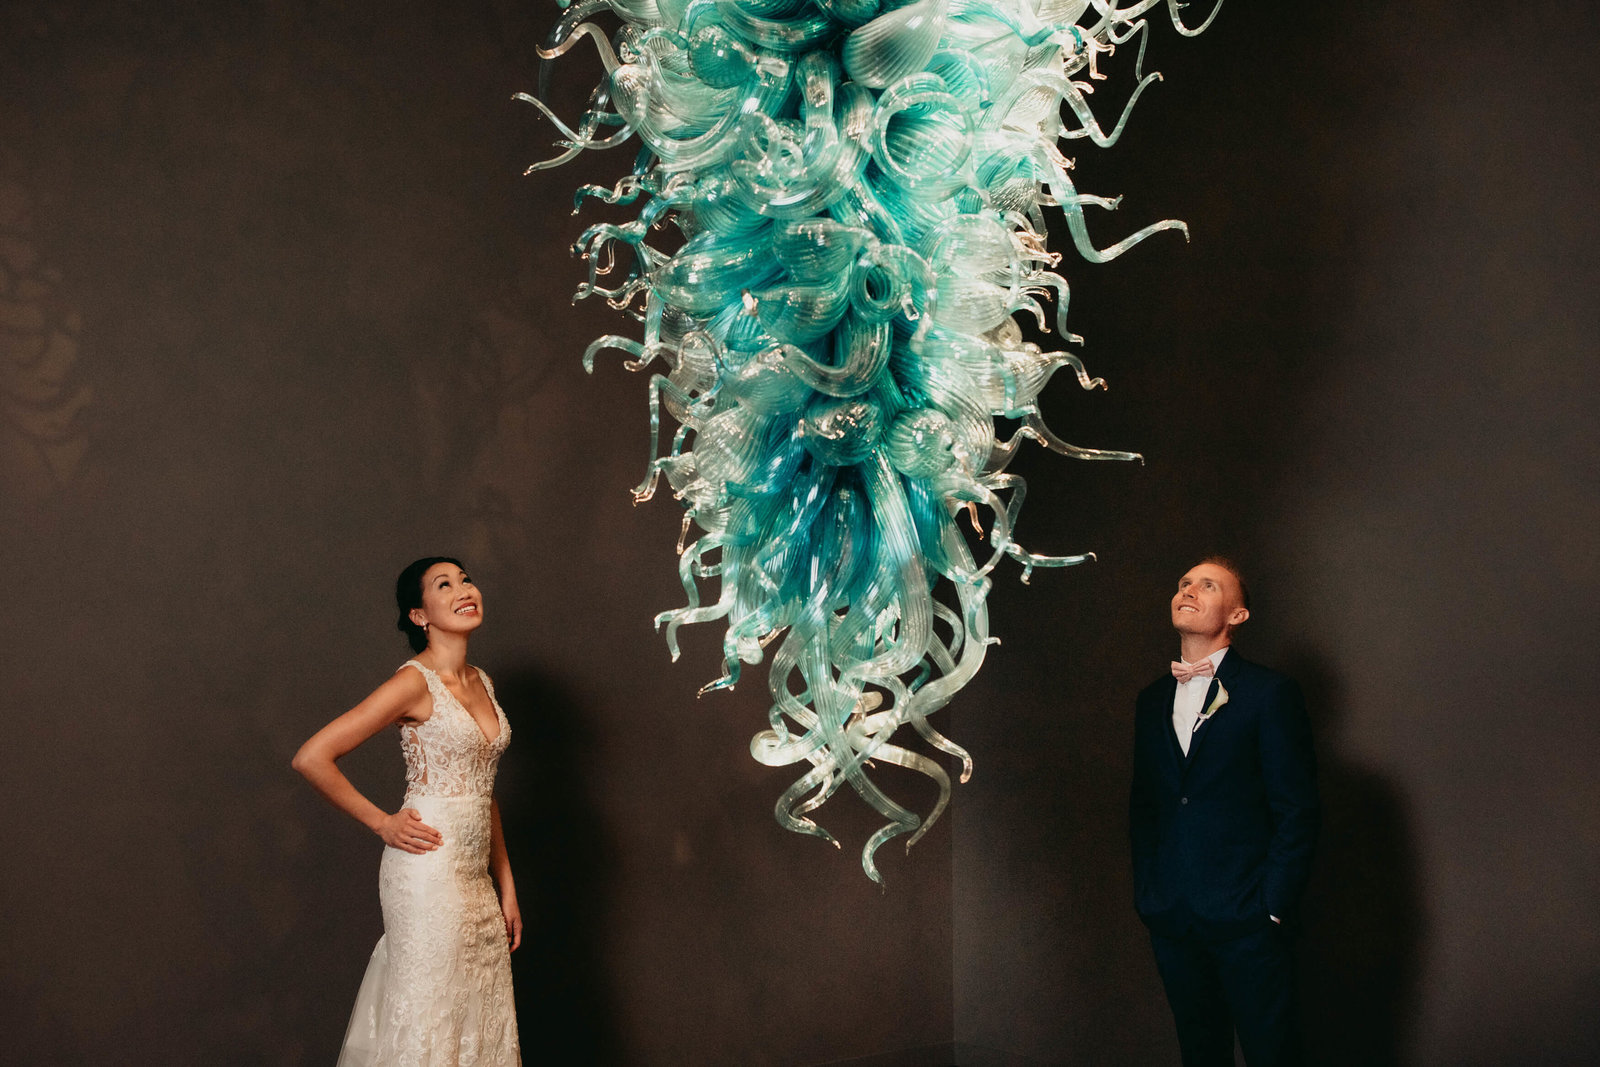 chihuly-garden-and-glass-wedding-sharel-eric-by-Adina-Preston-Photography-2019-377 2